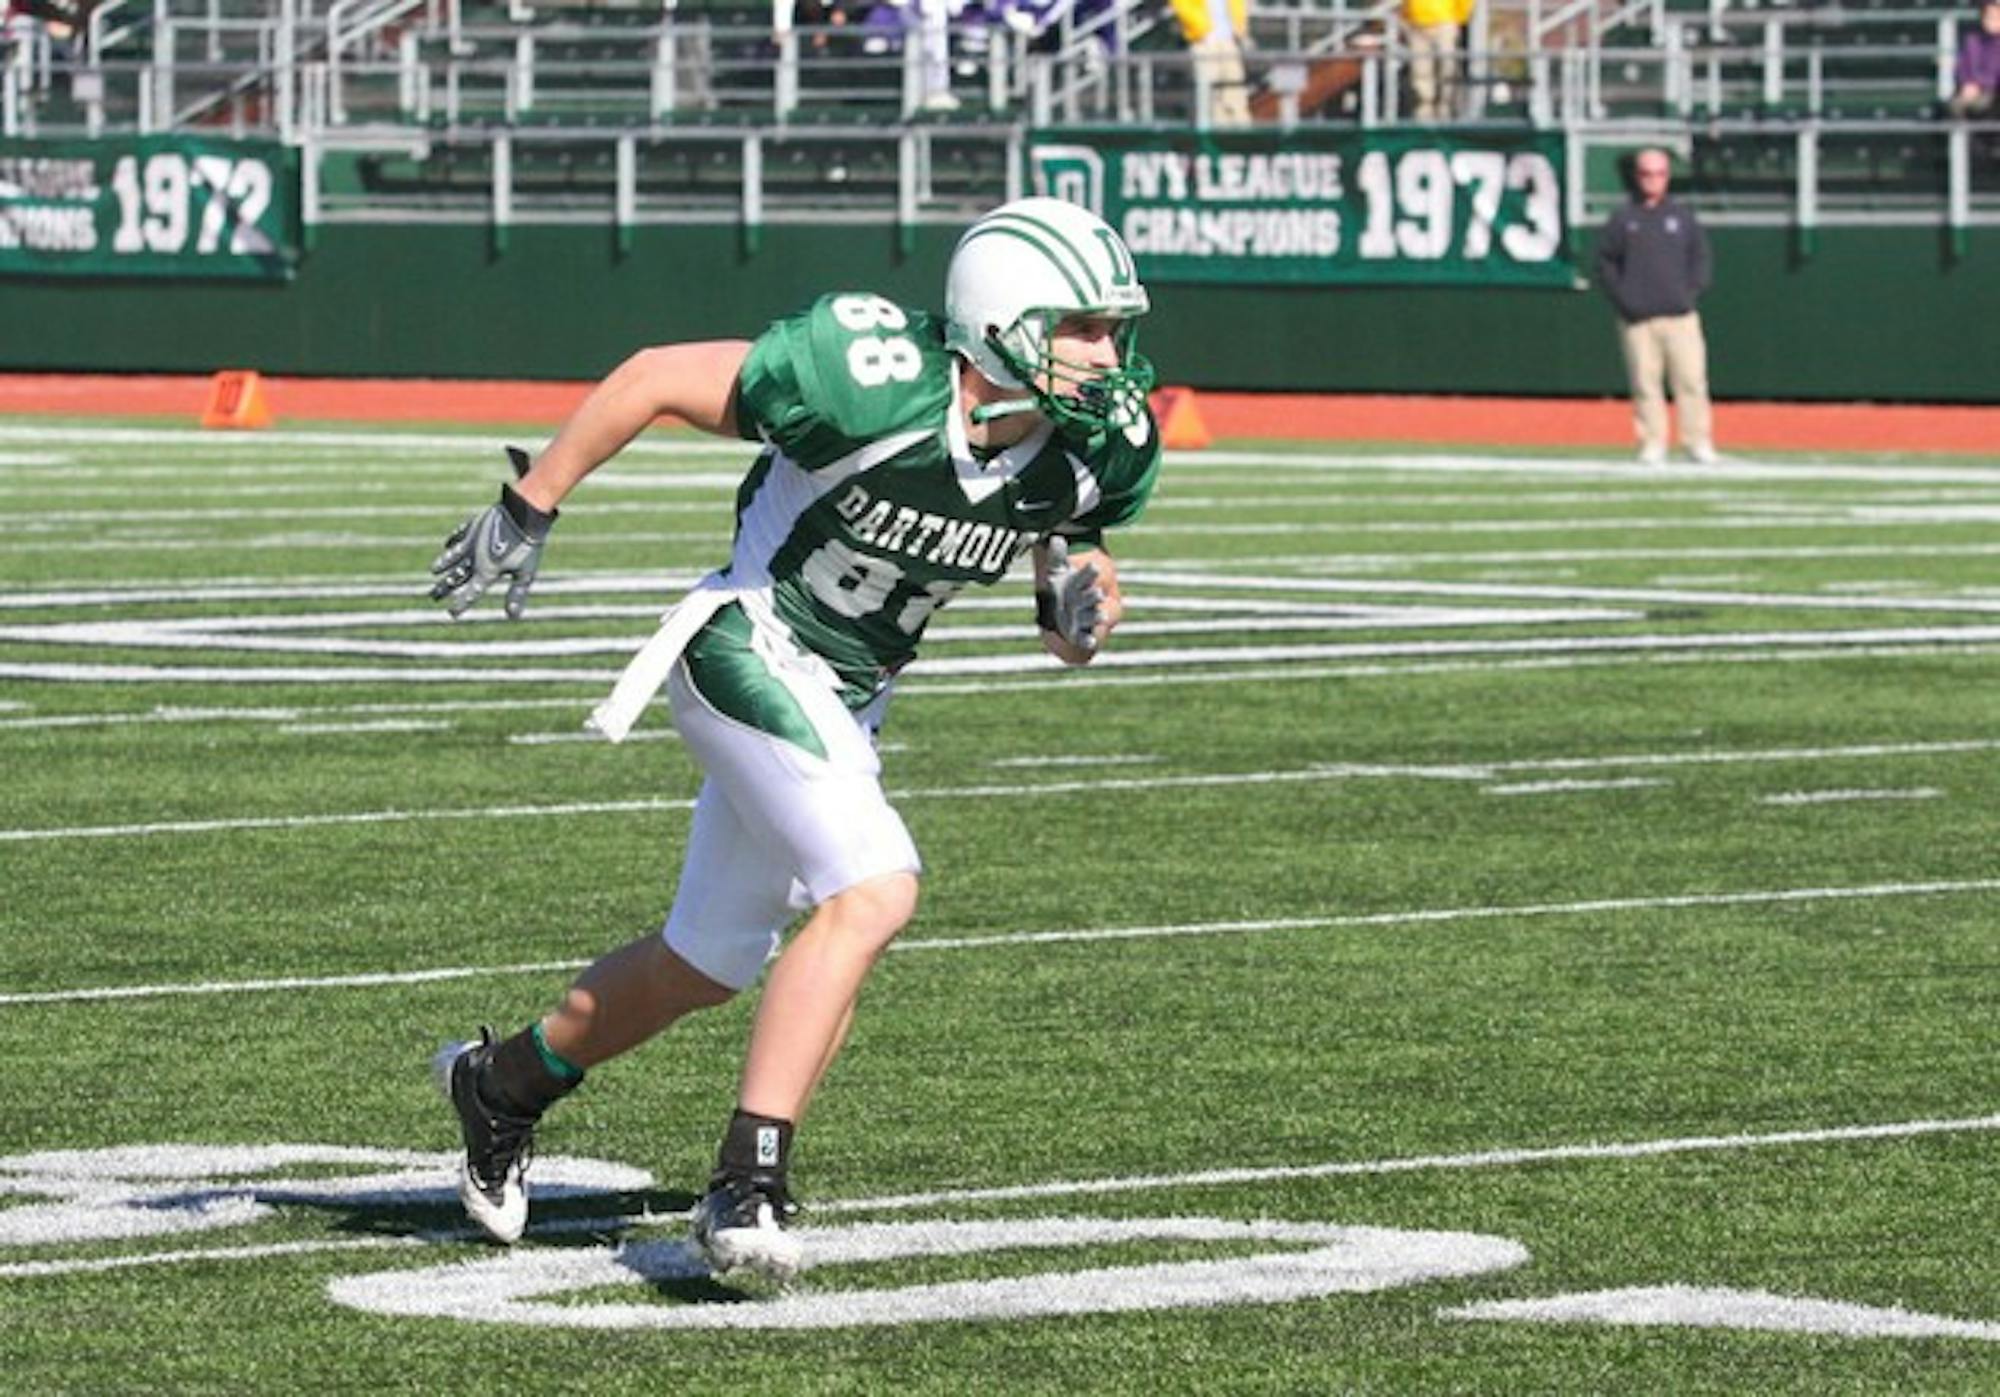 Philip Galligan '09 hauled in three catches for 44 yards against the Big Red, but Dartmouth's offense remained grounded in a 38-14 loss on Saturday.